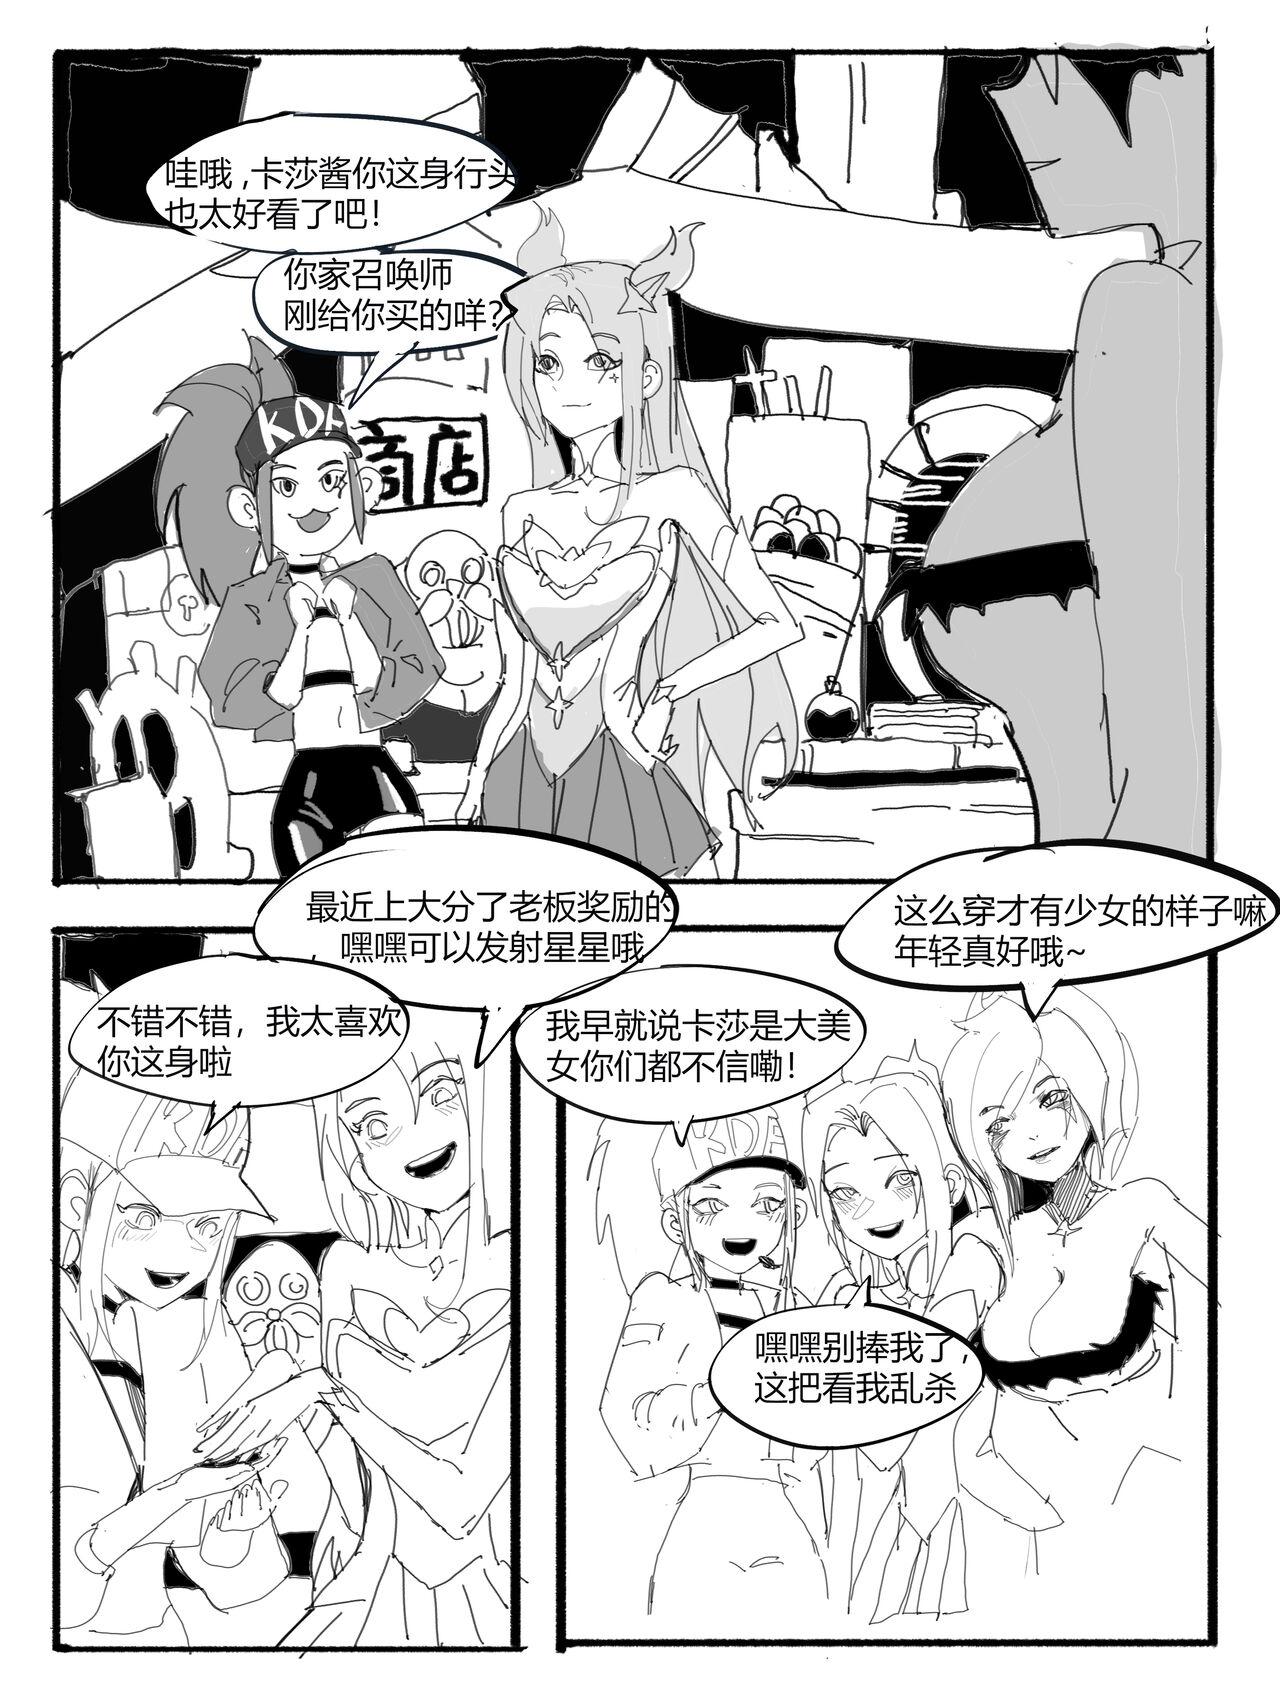 Family Taboo 被炼金男爵控制的中辅二人欺负卡莎 - League of legends Glamour Porn - Page 2